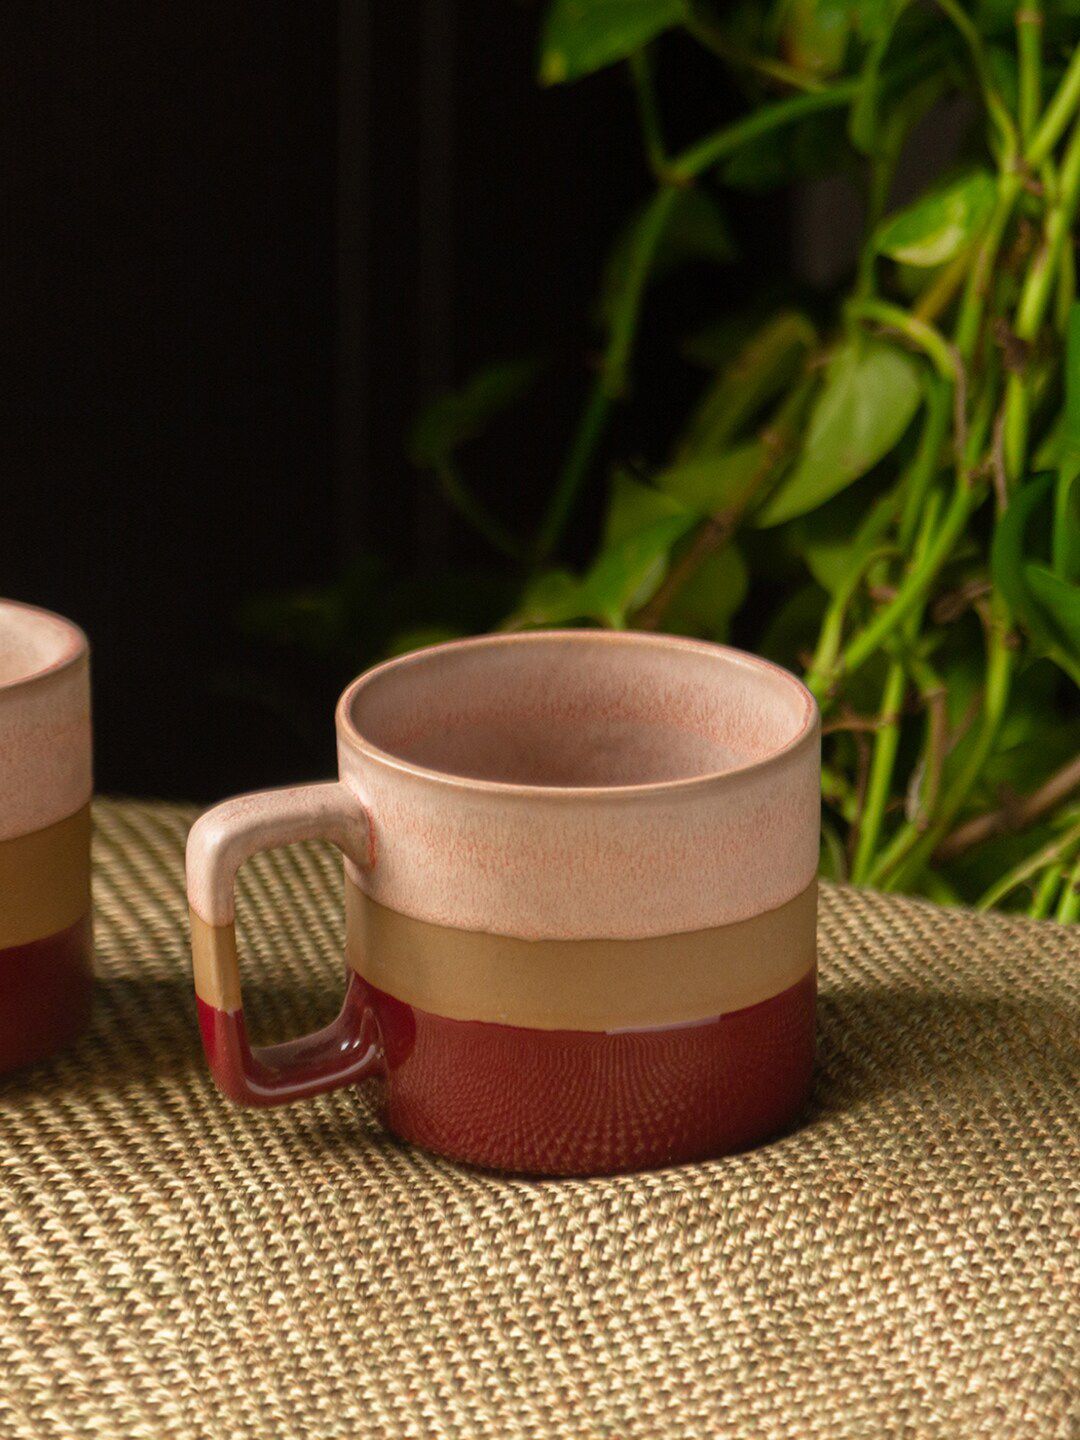 ExclusiveLane Peach-Coloured & Maroon Handcrafted Solid Ceramic Glossy Mugs Set of Cups and Mugs Price in India